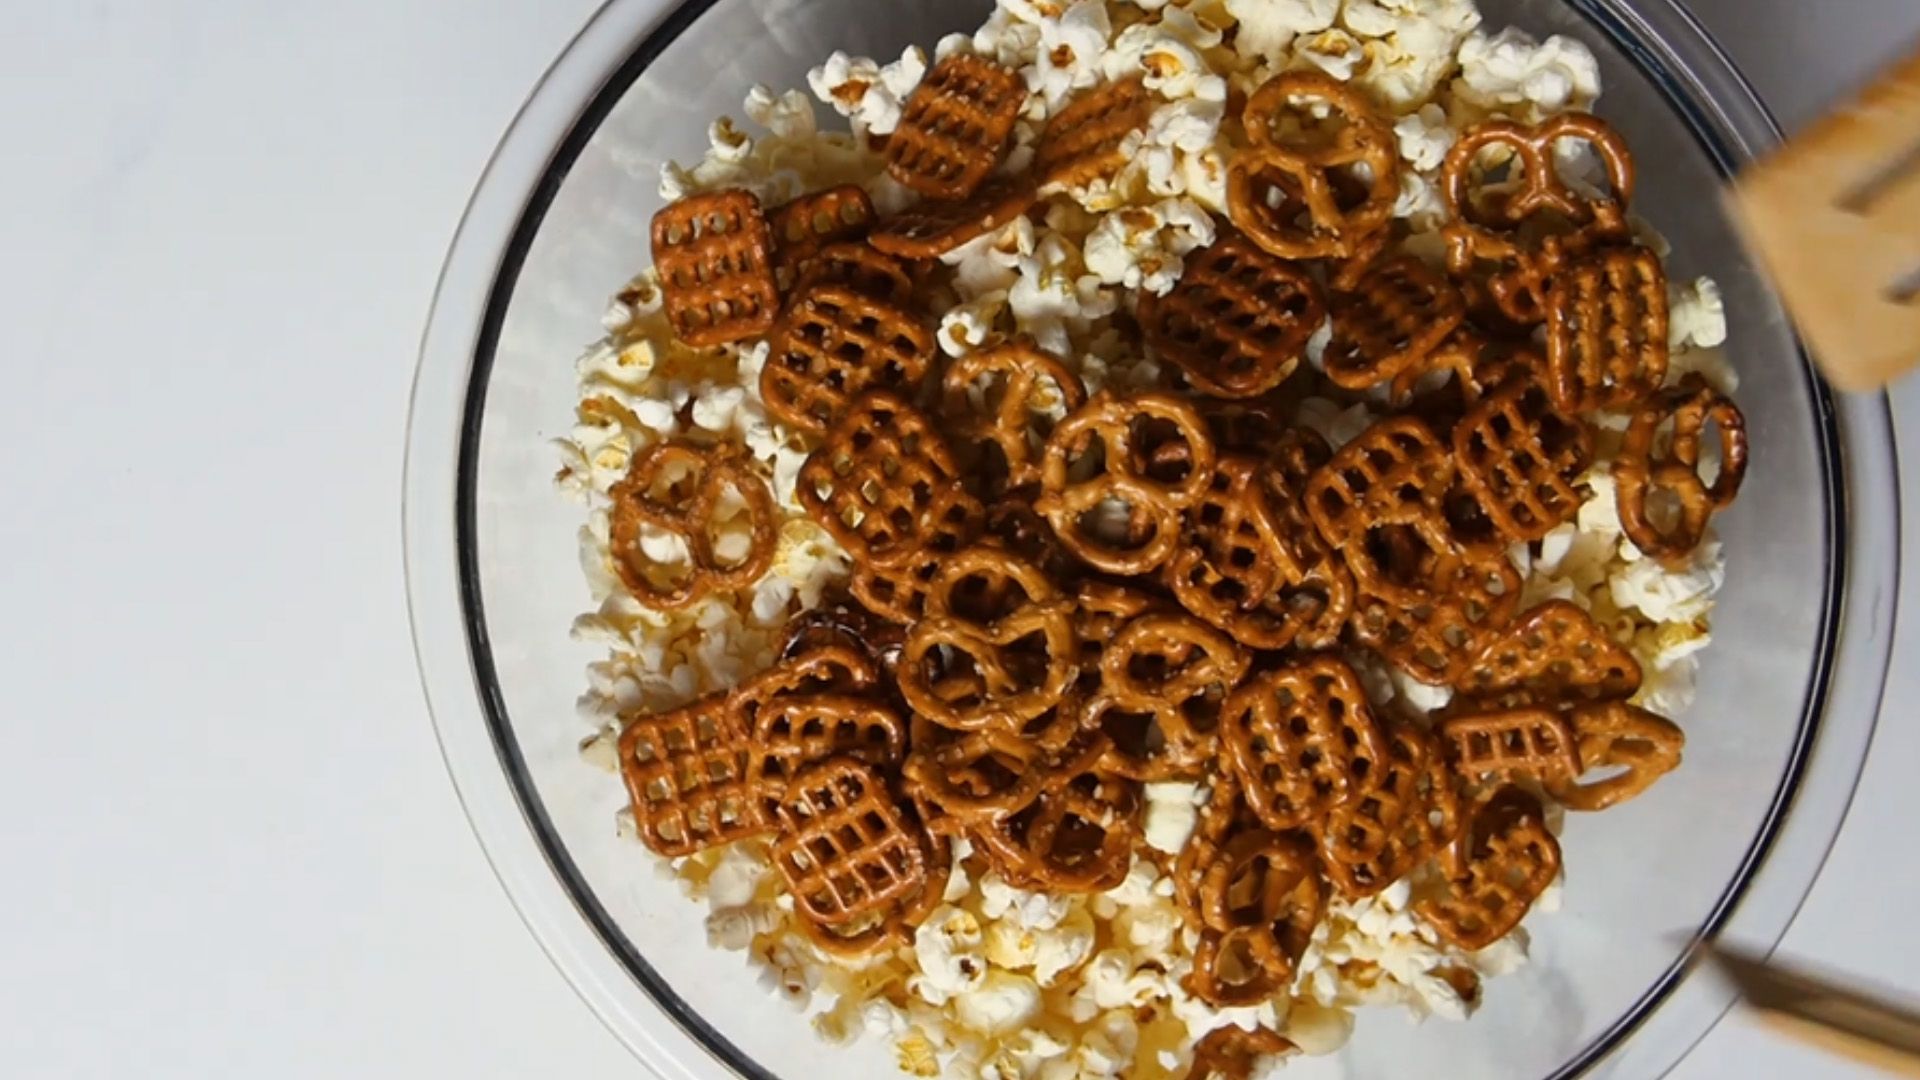 pretzels and popcorn in a glass mixing bowl